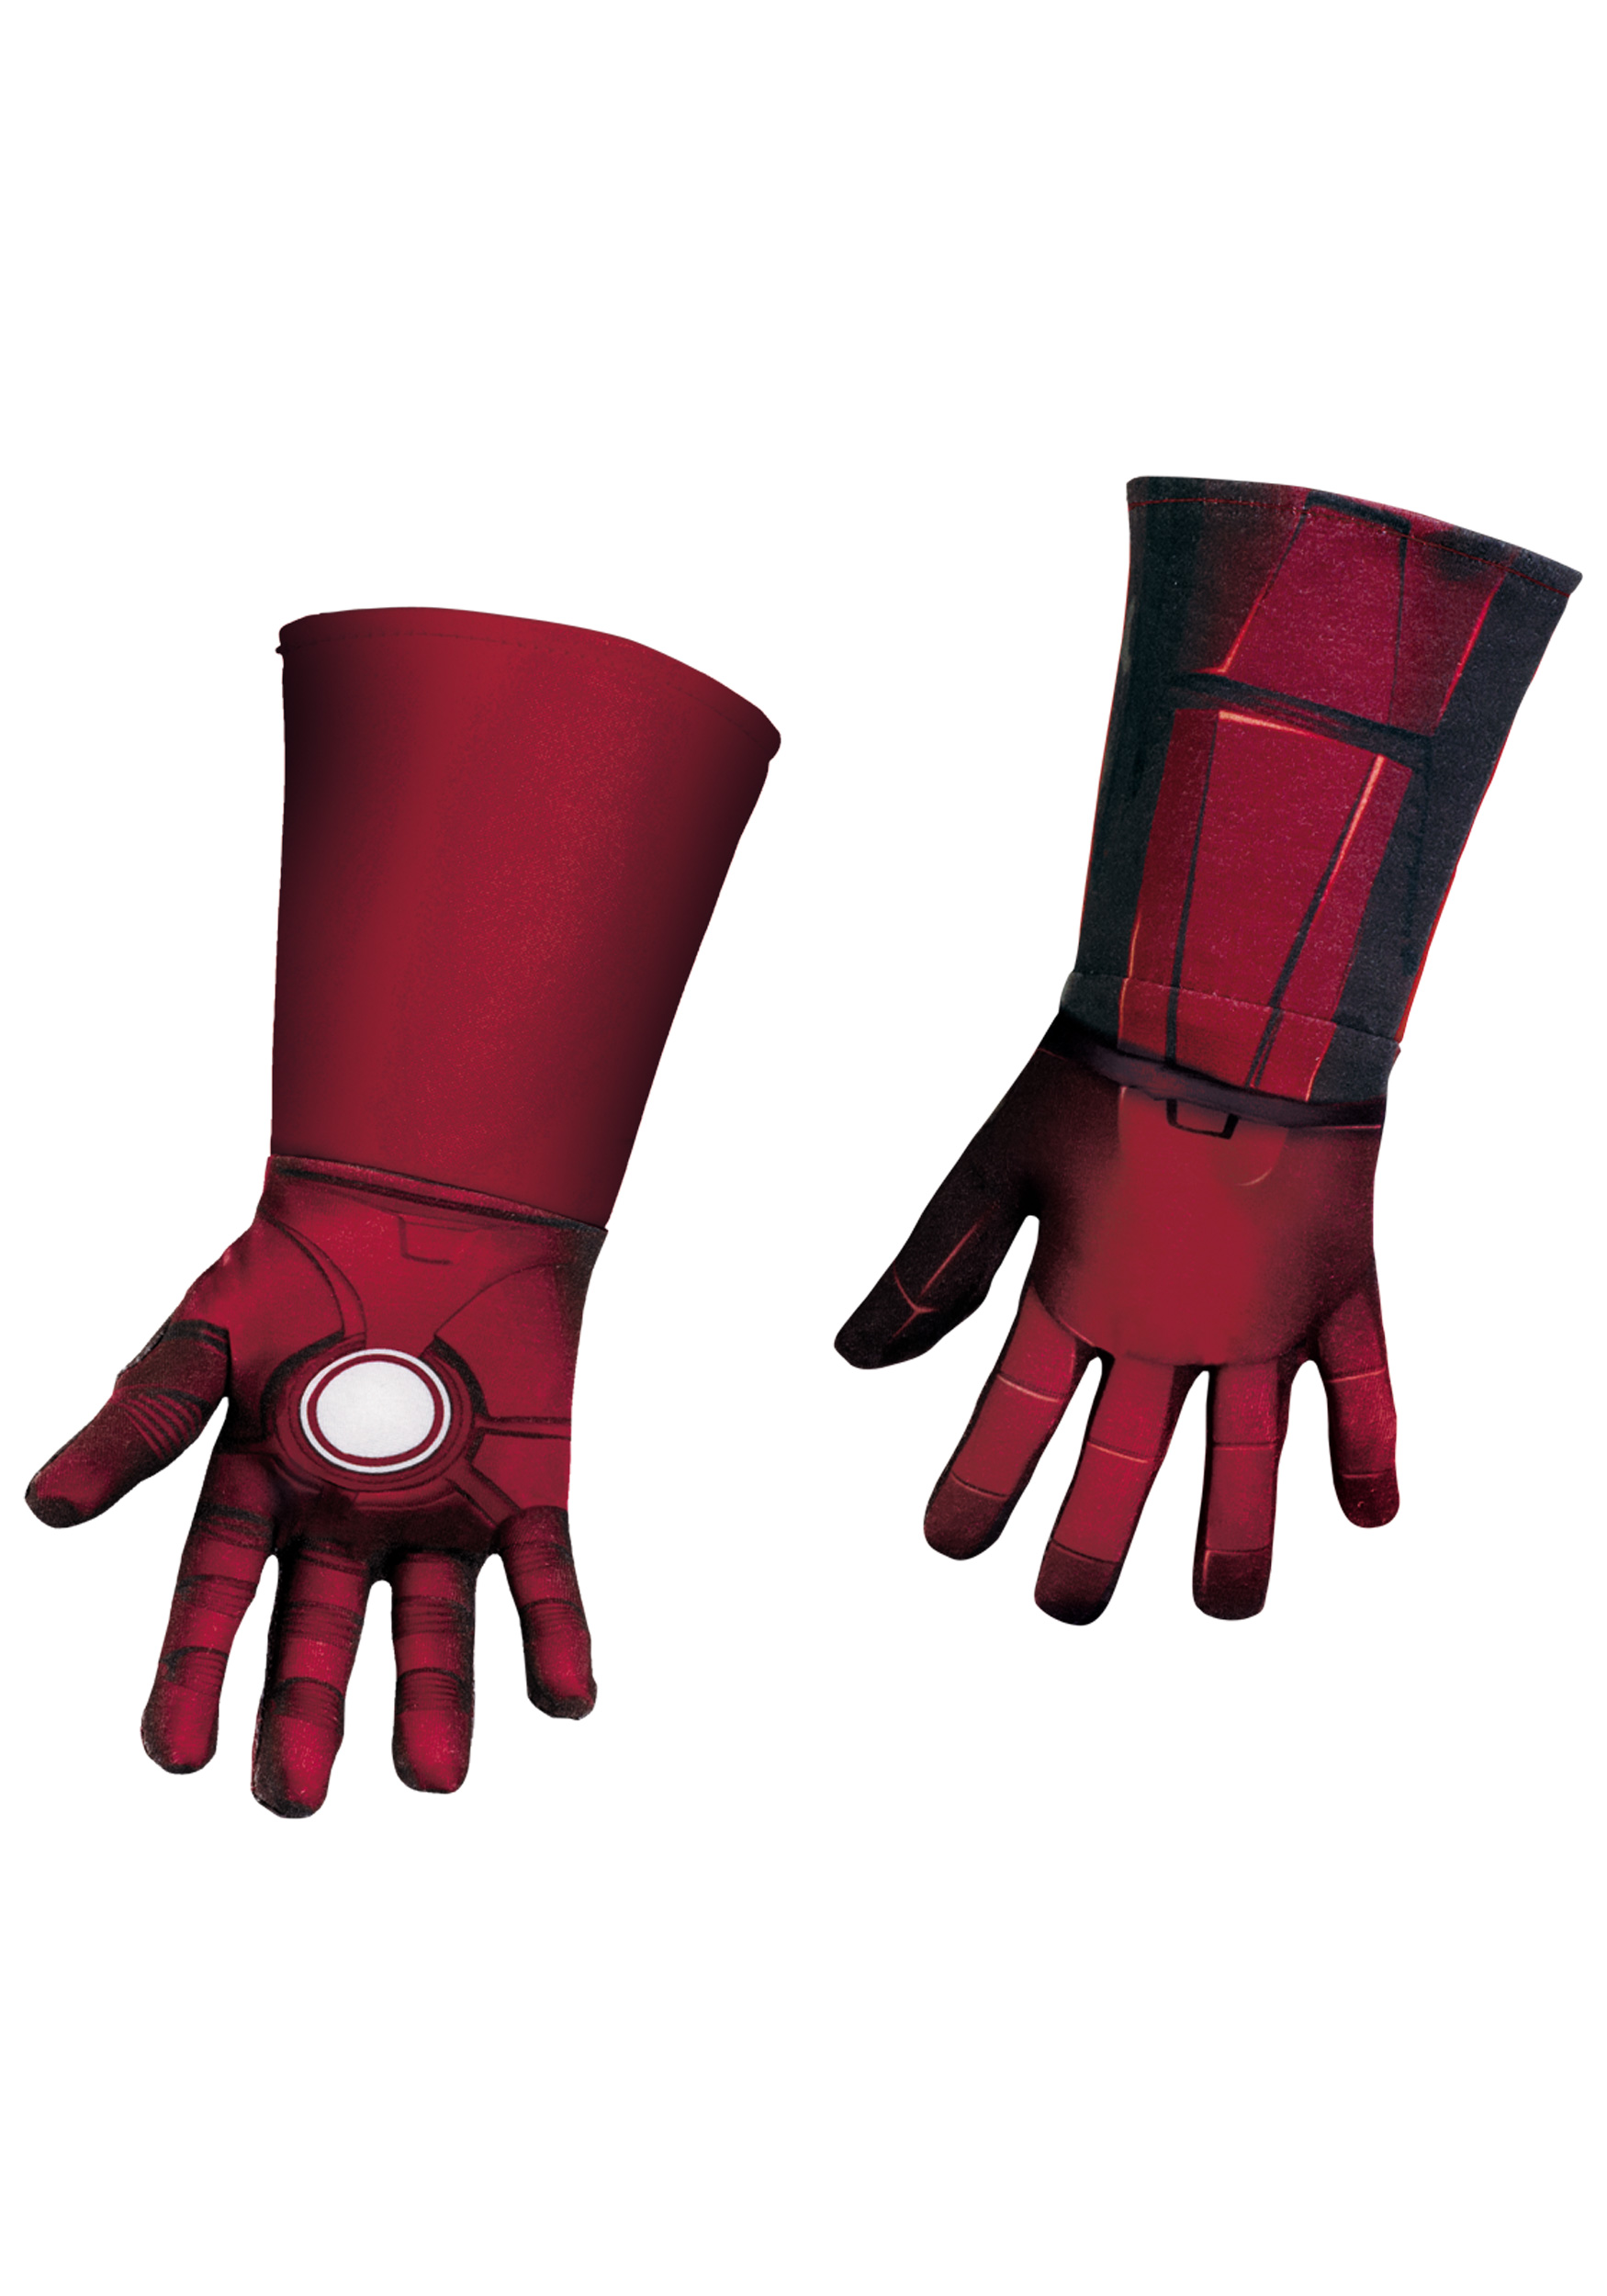 Avengers IRON MAN MARK VII Deluxe Child Gloves - Click Image to Close